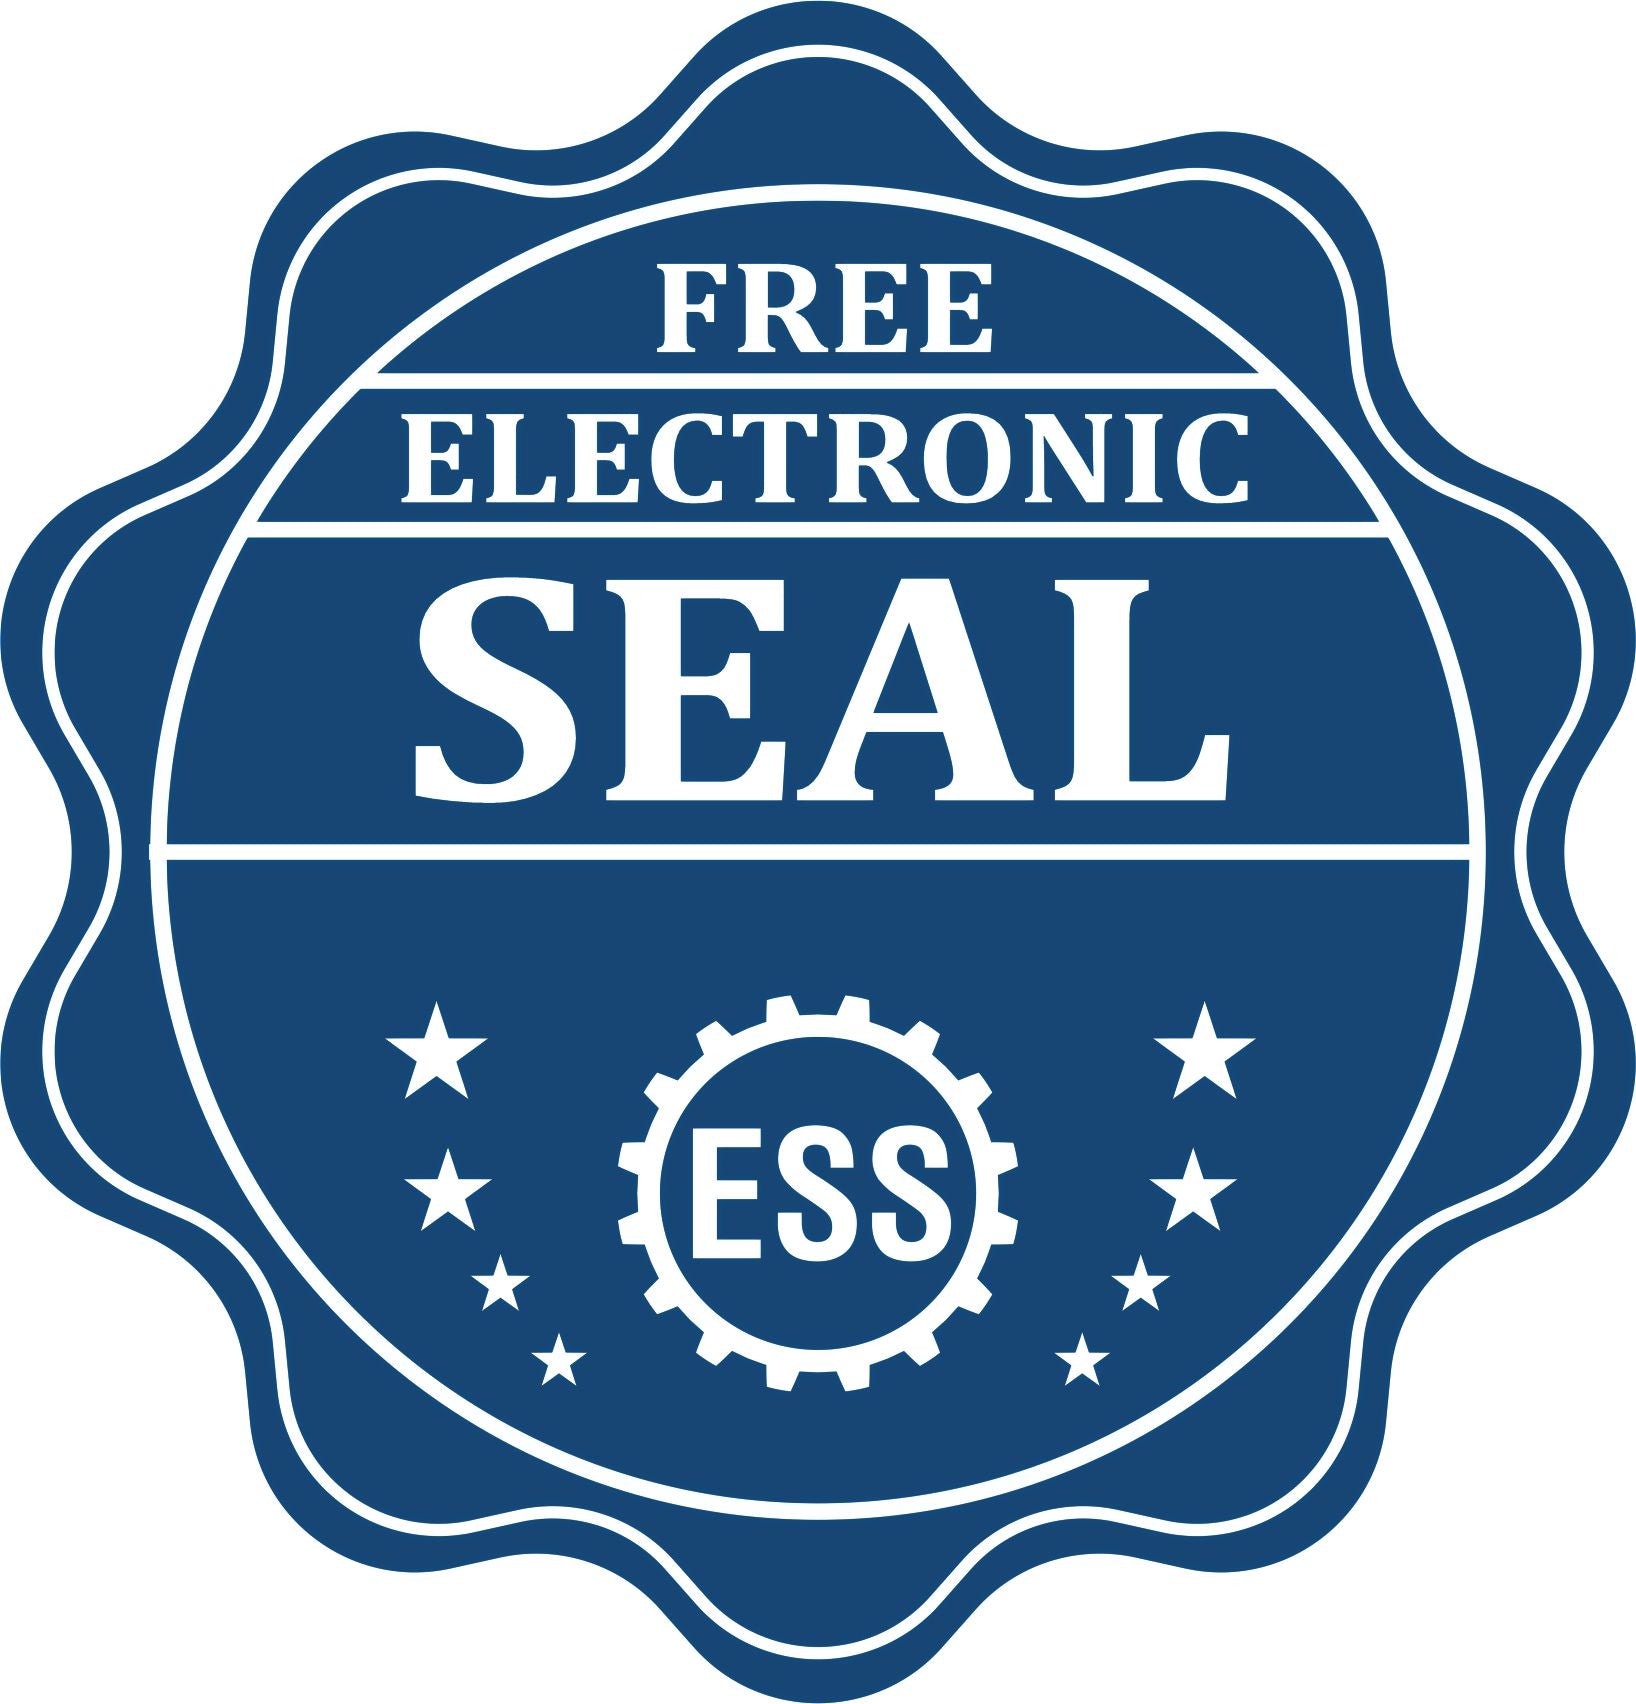 A badge showing a free electronic seal for the Connecticut Geologist Desk Seal with stars and the ESS gear on the emblem.